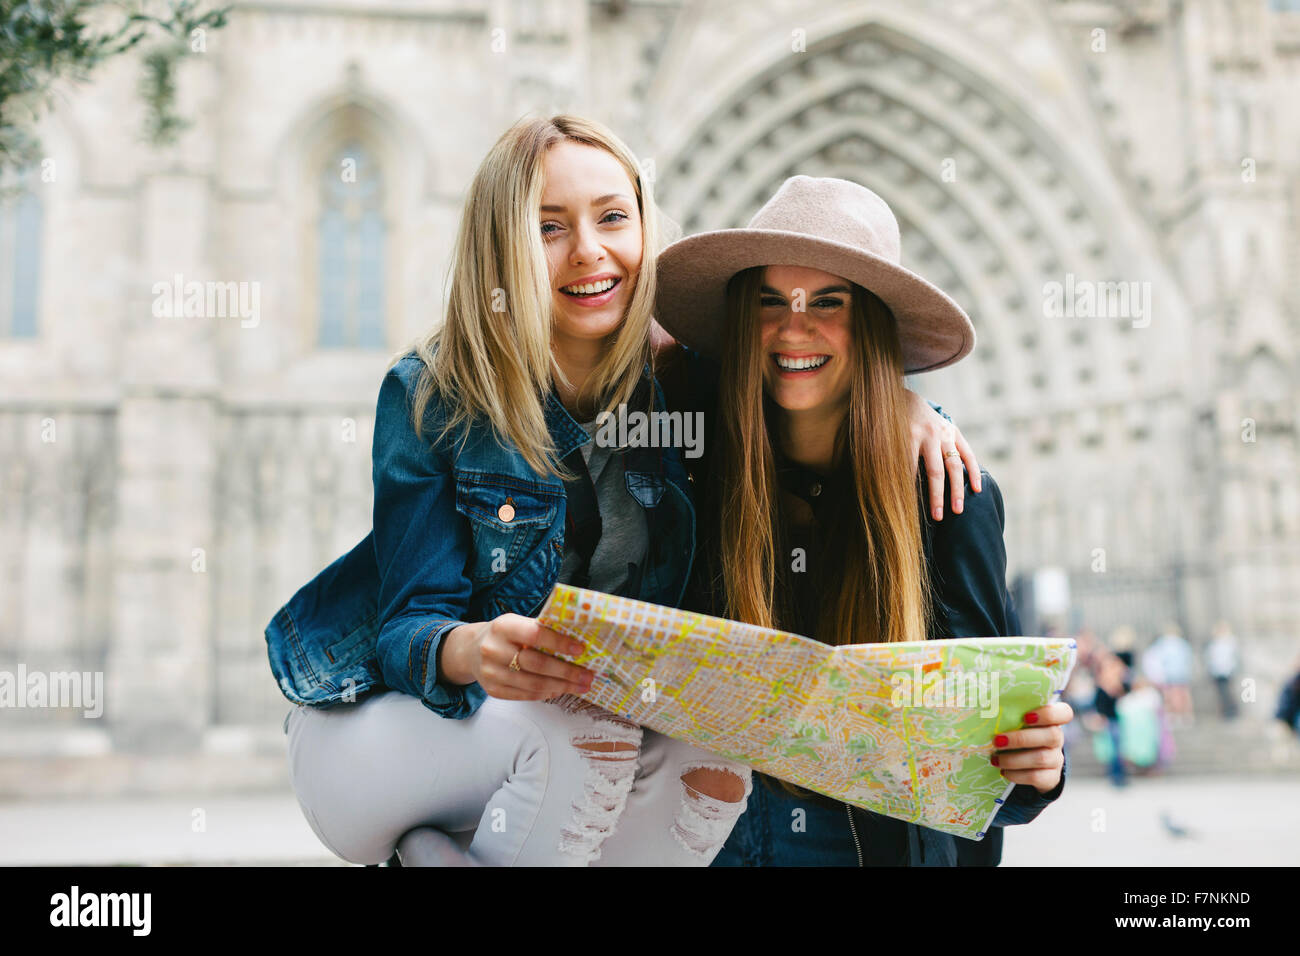 Spain, Barcelona, two happy young women reading map Stock Photo